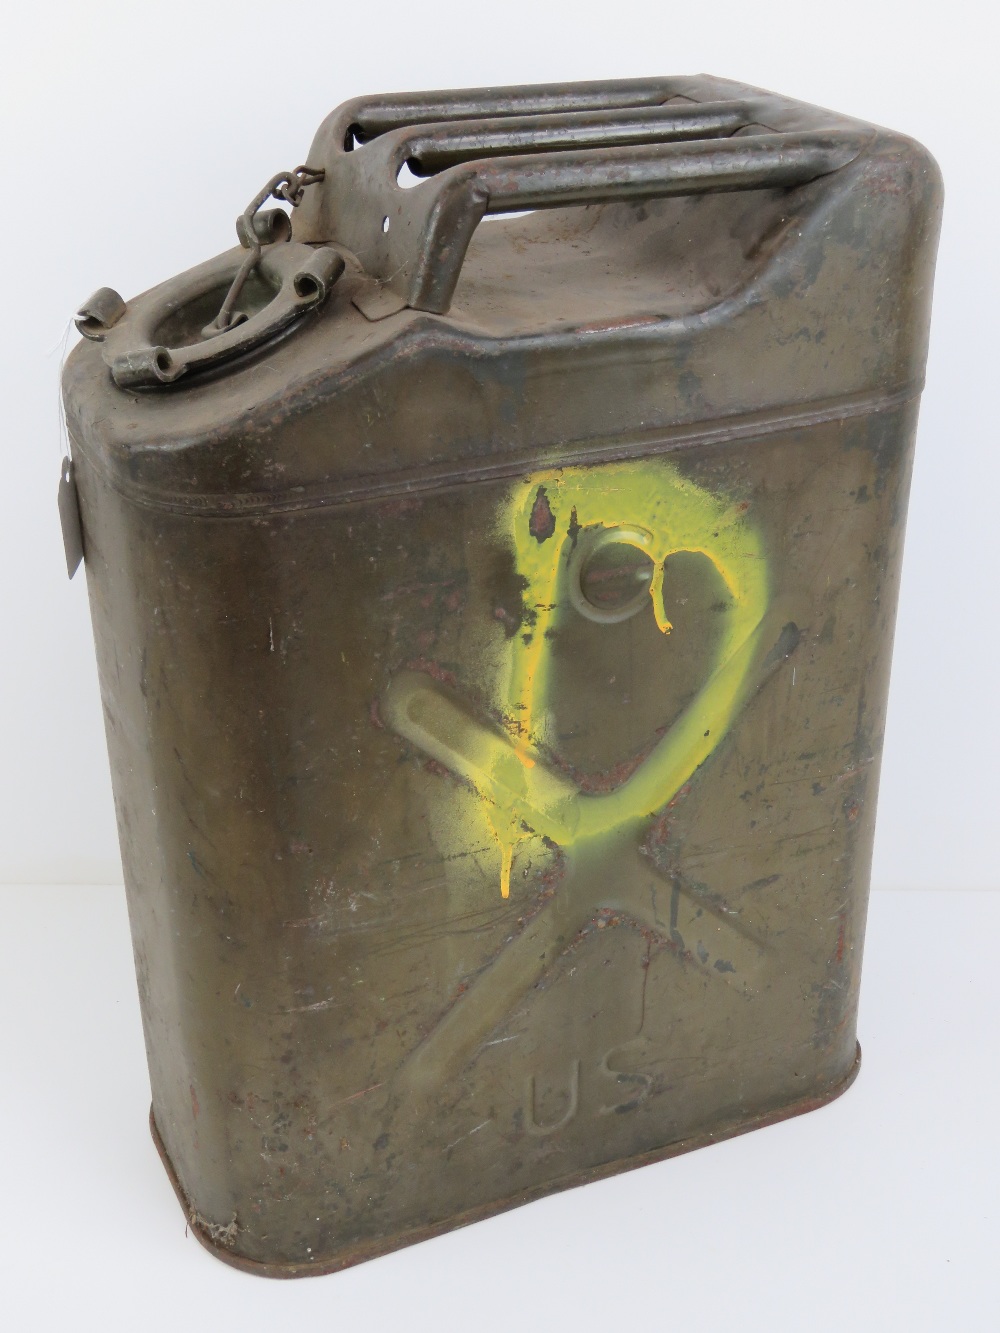 A US 20L 'Jerry can'.